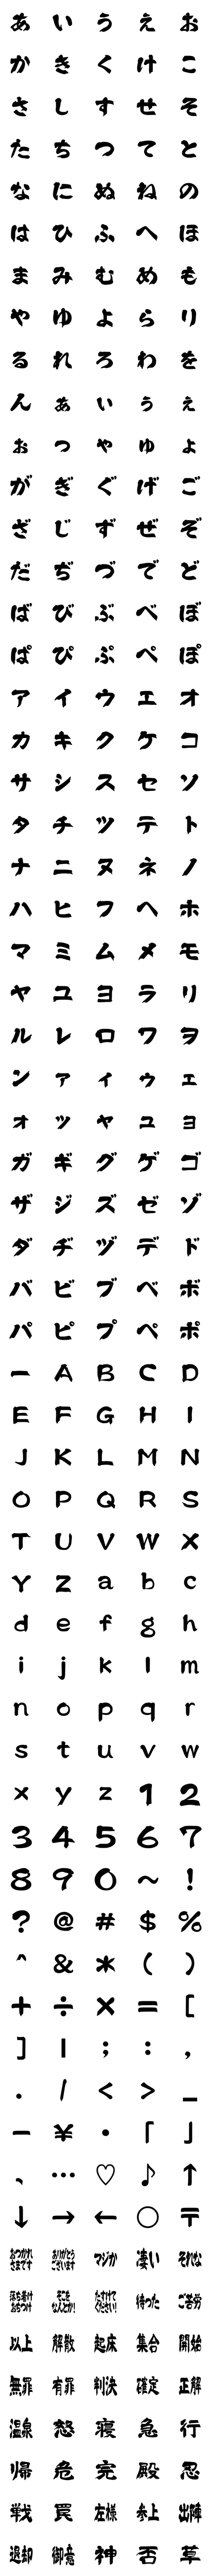 [LINE絵文字]DF大河体 フォント絵文字の画像一覧